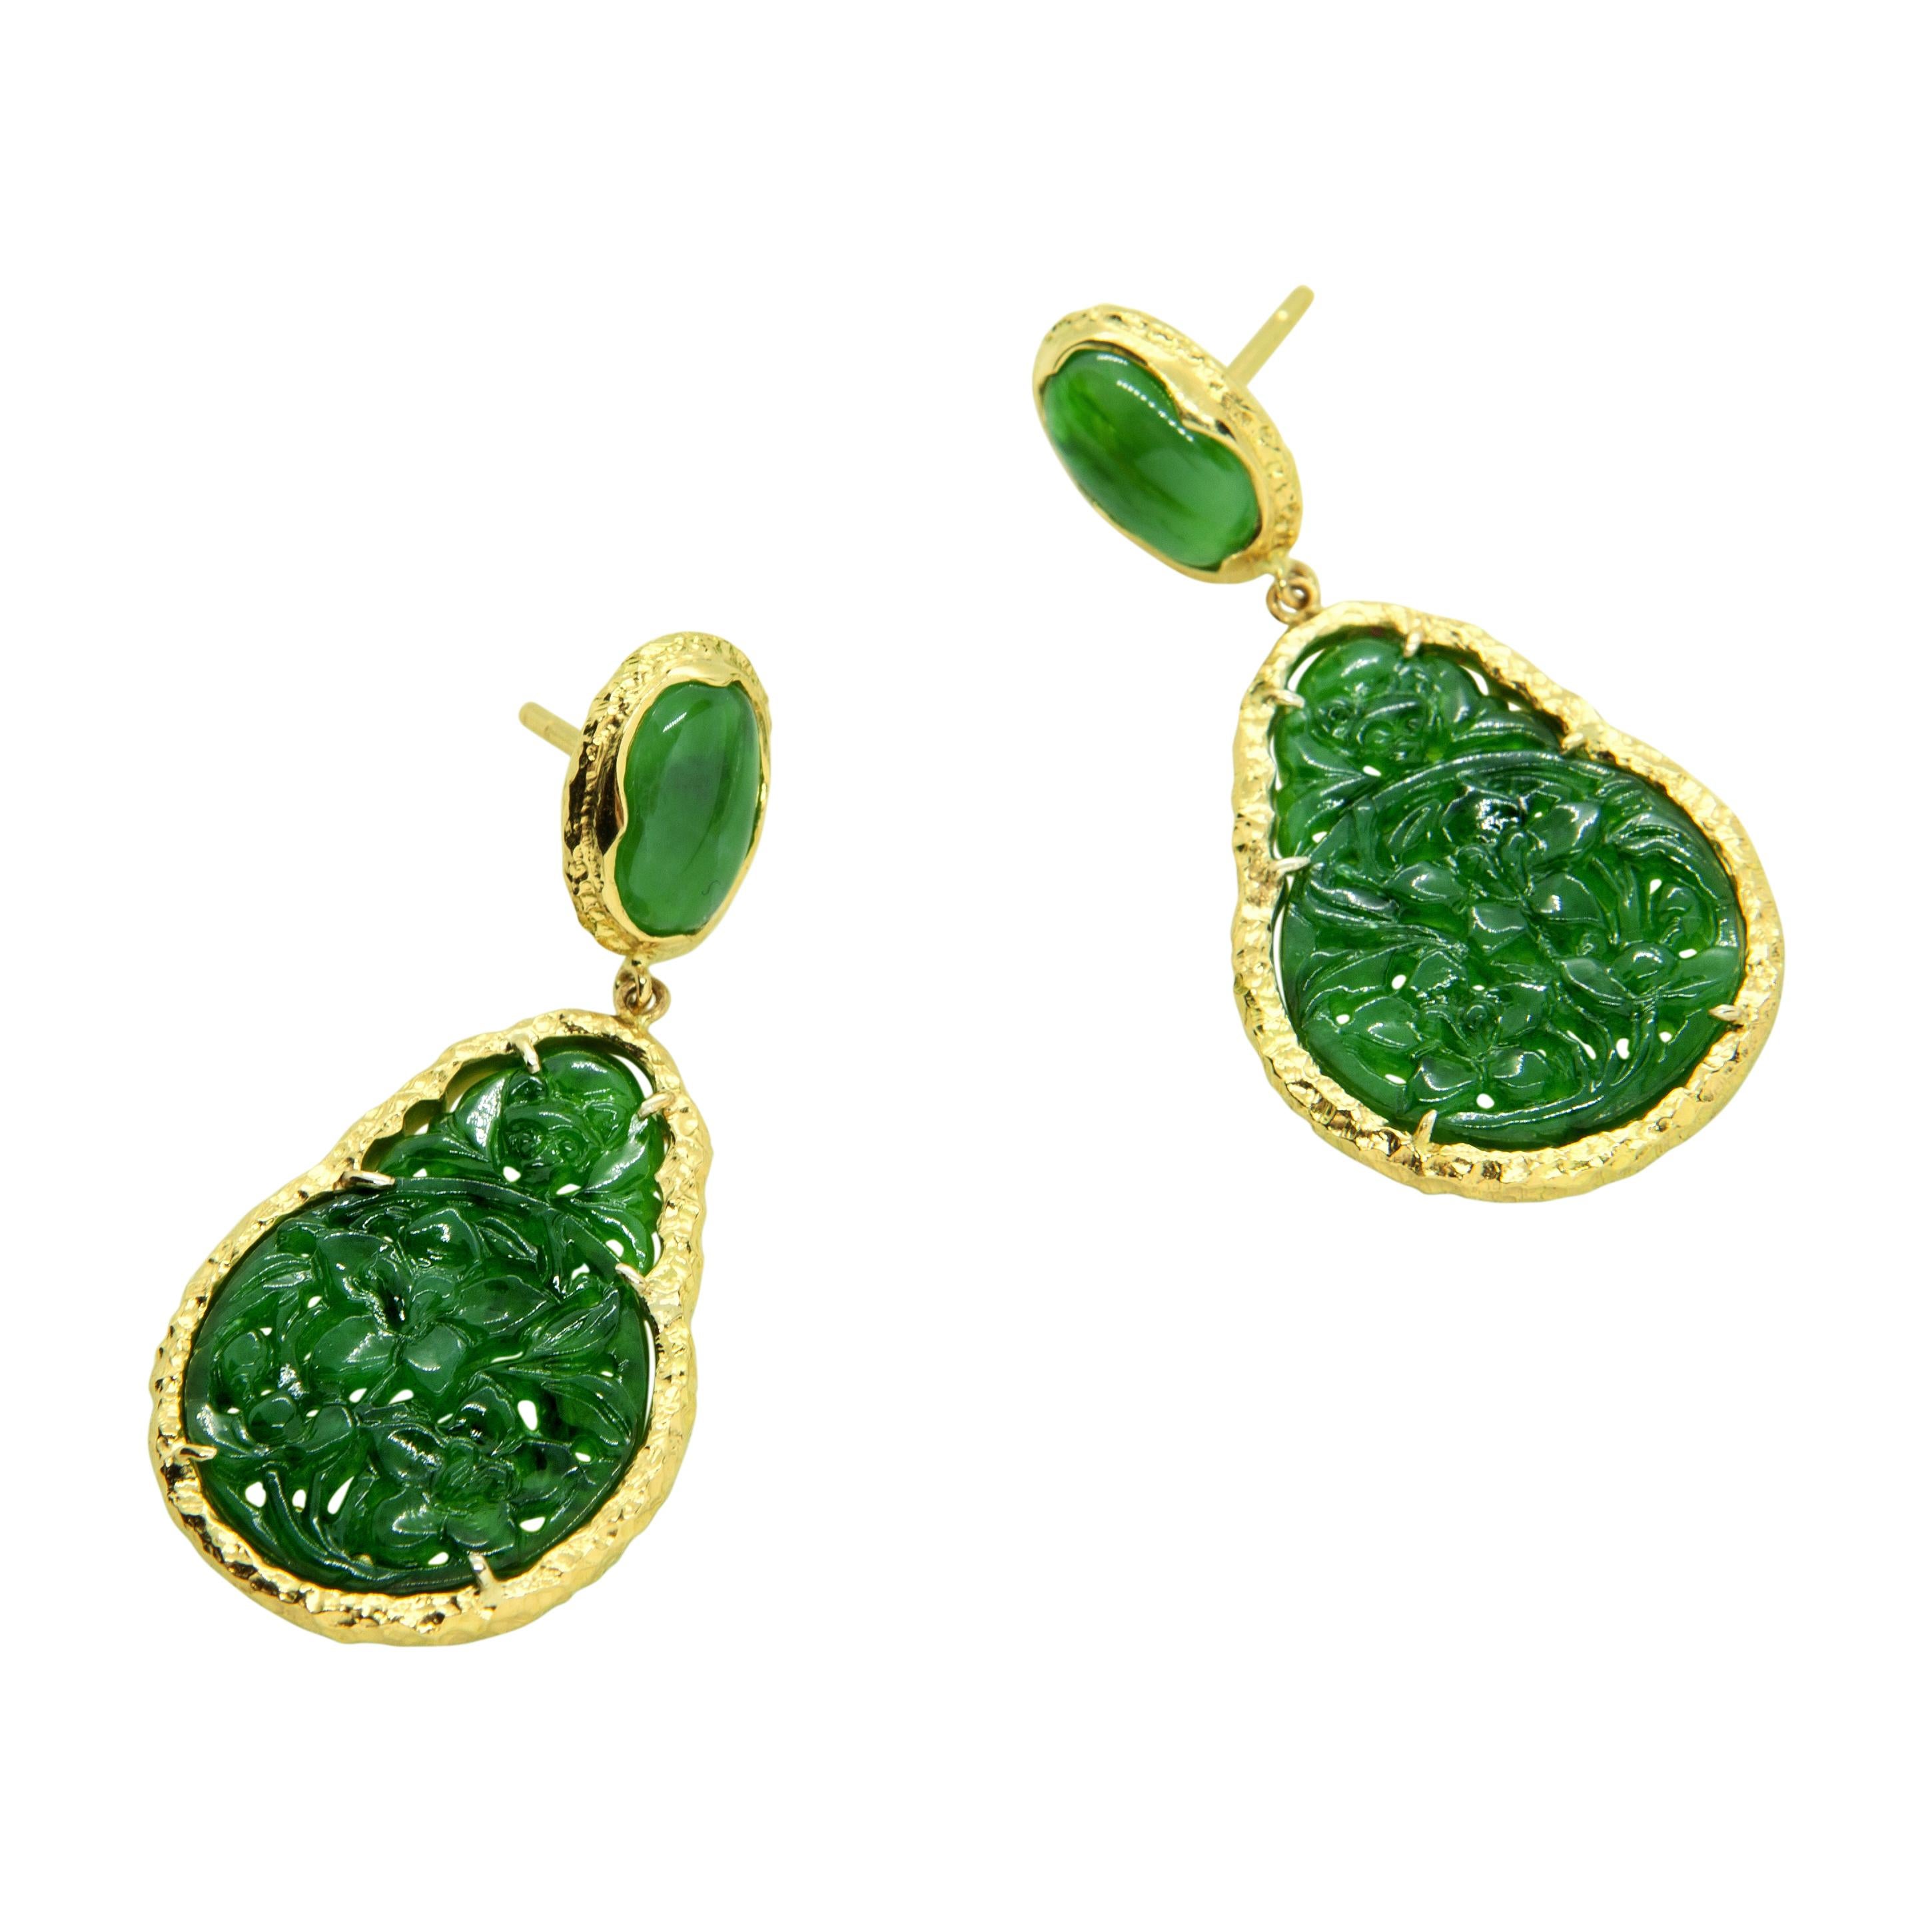 This one of a kind pair of earrings are from Lingjun's 'FISSURE' collection, featuring hand-carved, imperial green coloured 'A' type jadeite jade. 

Measurement: approximately 42.5x20.5x3-3.8mm.

'FISSURE' is a collection inspired by the crevices in